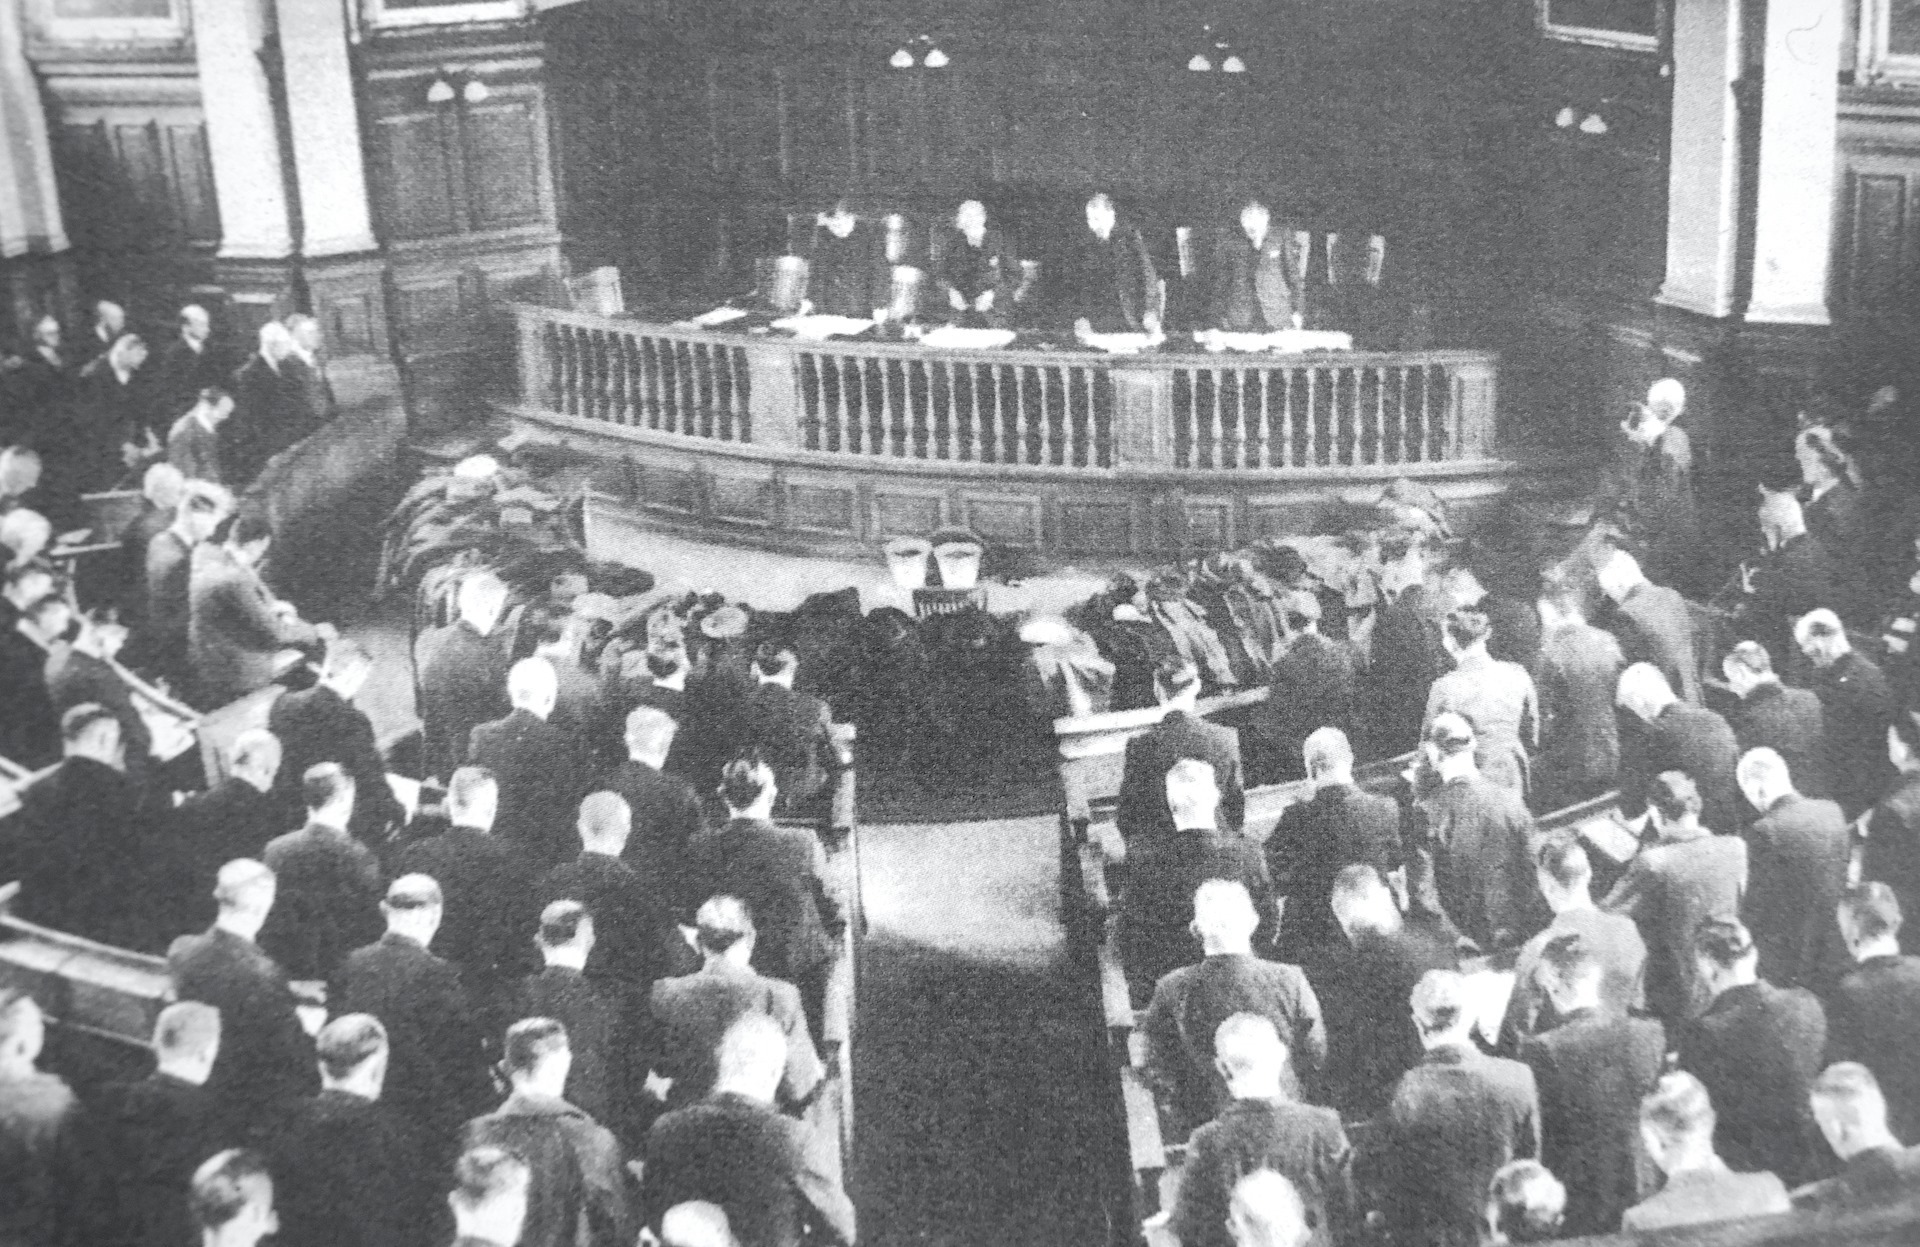 Delegates in the PItman’s Parliament bow their heads in silence, in January 1944, to honour the men killed in Durham’s mines since the previous meeting